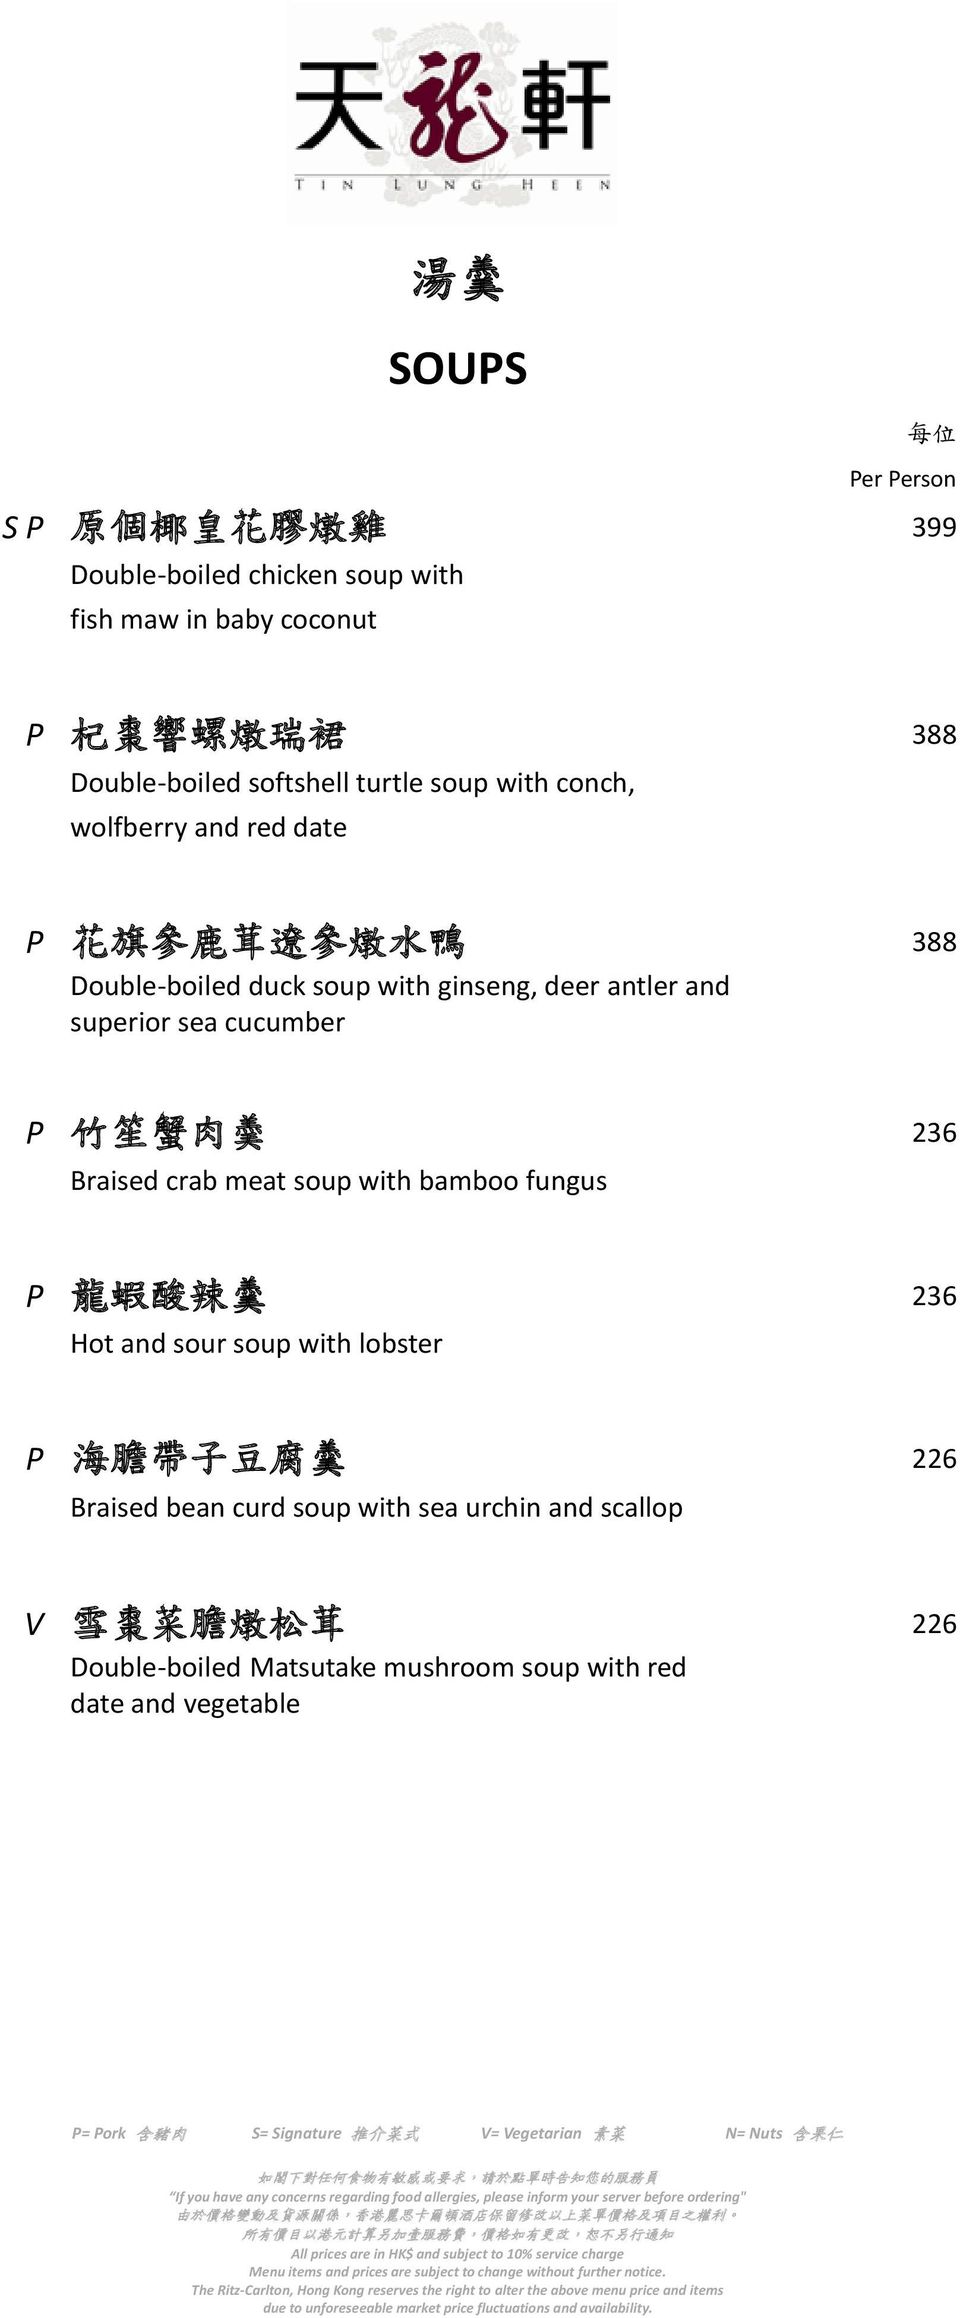 superior sea cucumber P 竹 笙 蟹 肉 羮 236 Braised crab meat soup with bamboo fungus P 龍 蝦 酸 辣 羹 236 Hot and sour soup with lobster P 海 膽 帶 子 豆